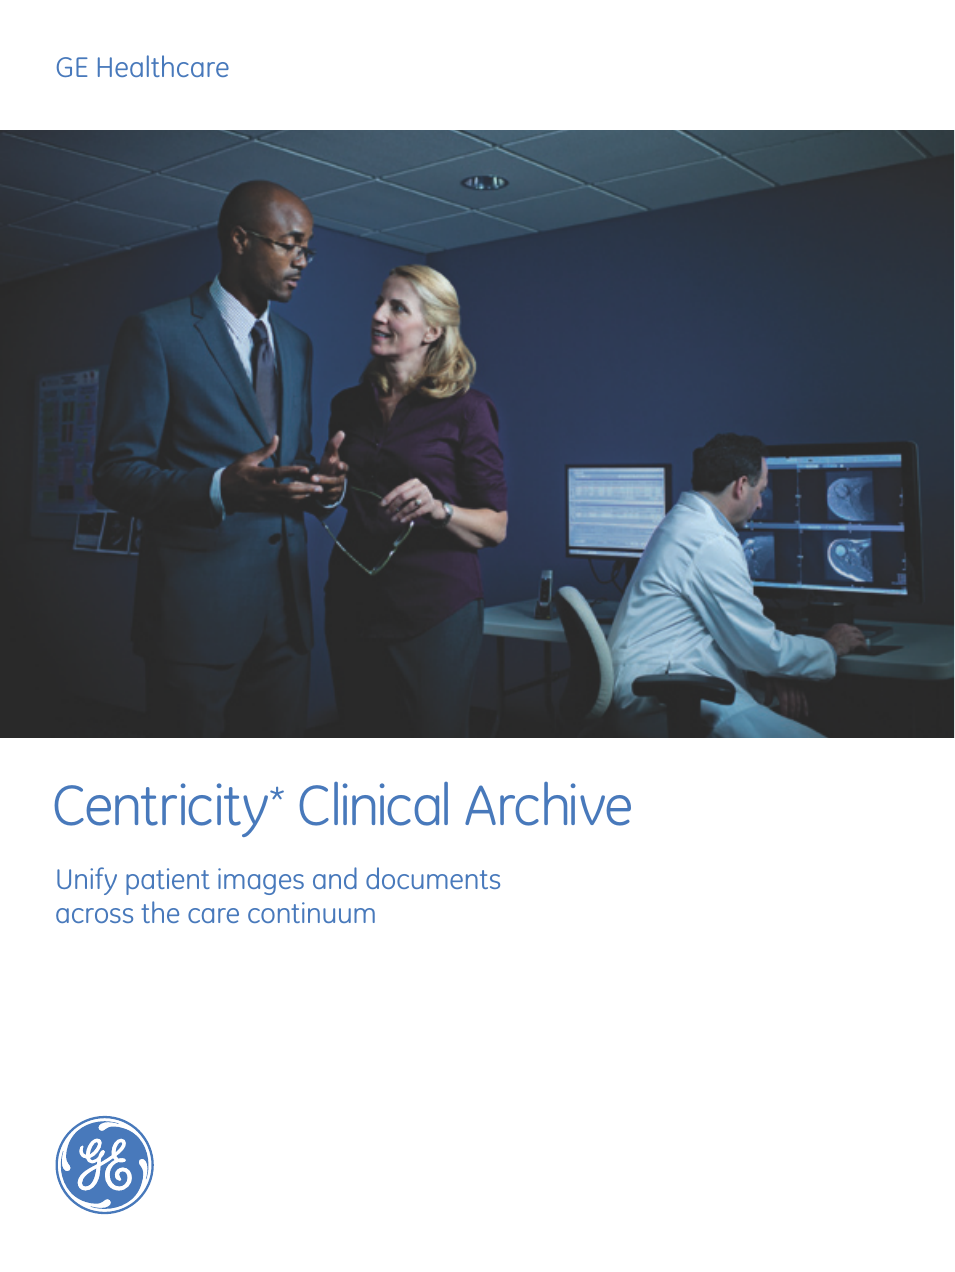 Centricity Clinical Archive